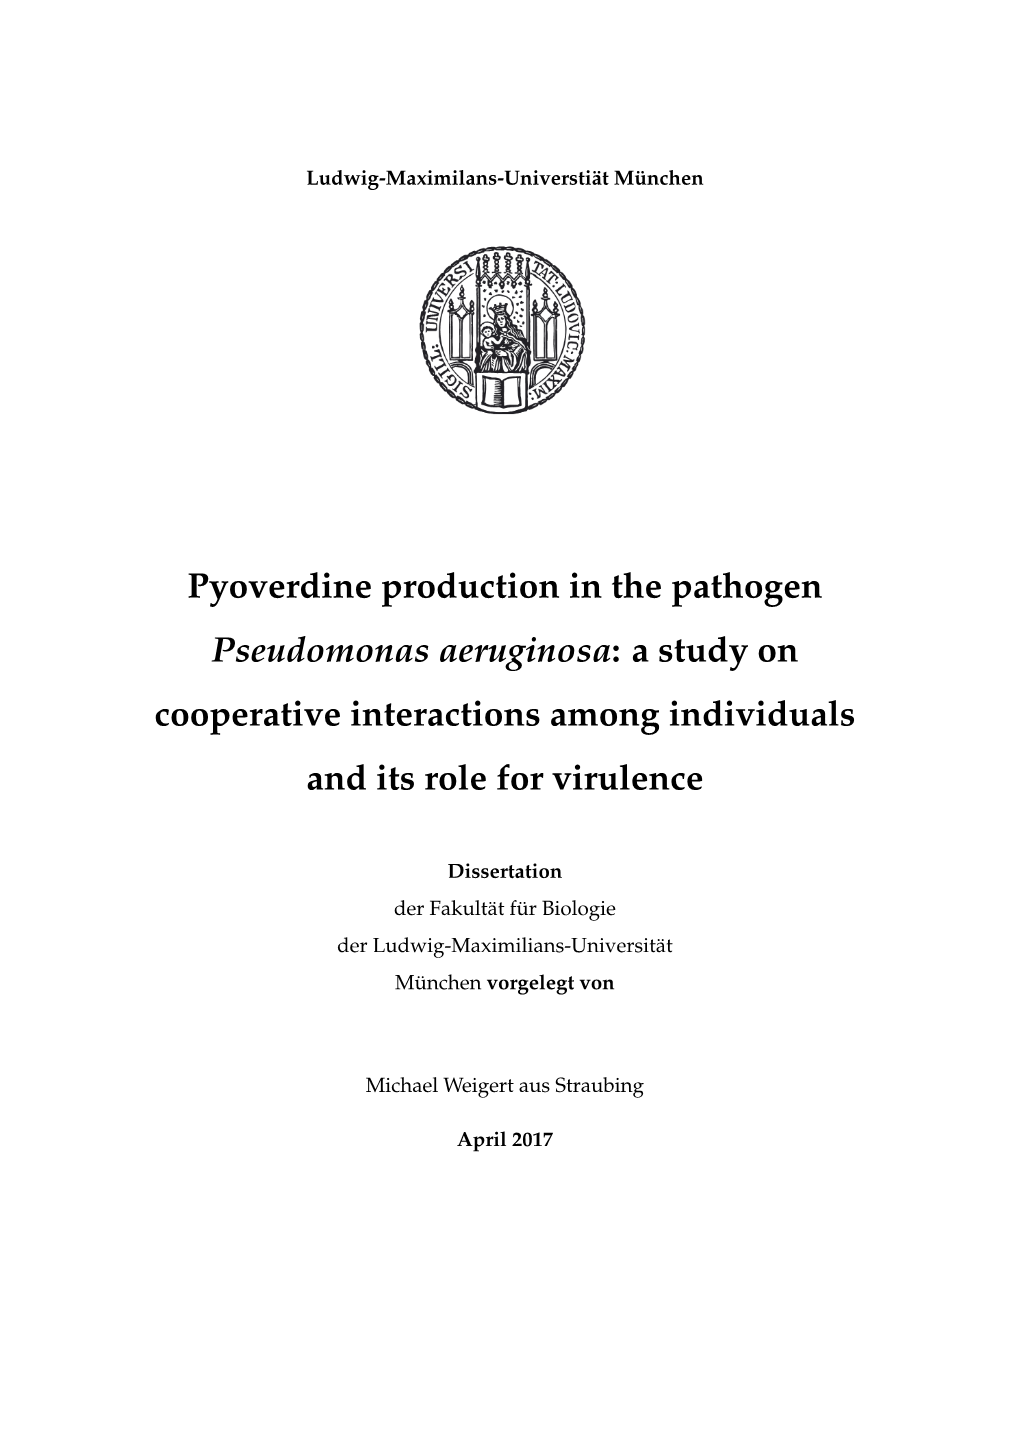 Pyoverdine Production in the Pathogen Pseudomonas Aeruginosa: a Study on Cooperative Interactions Among Individuals and Its Role for Virulence